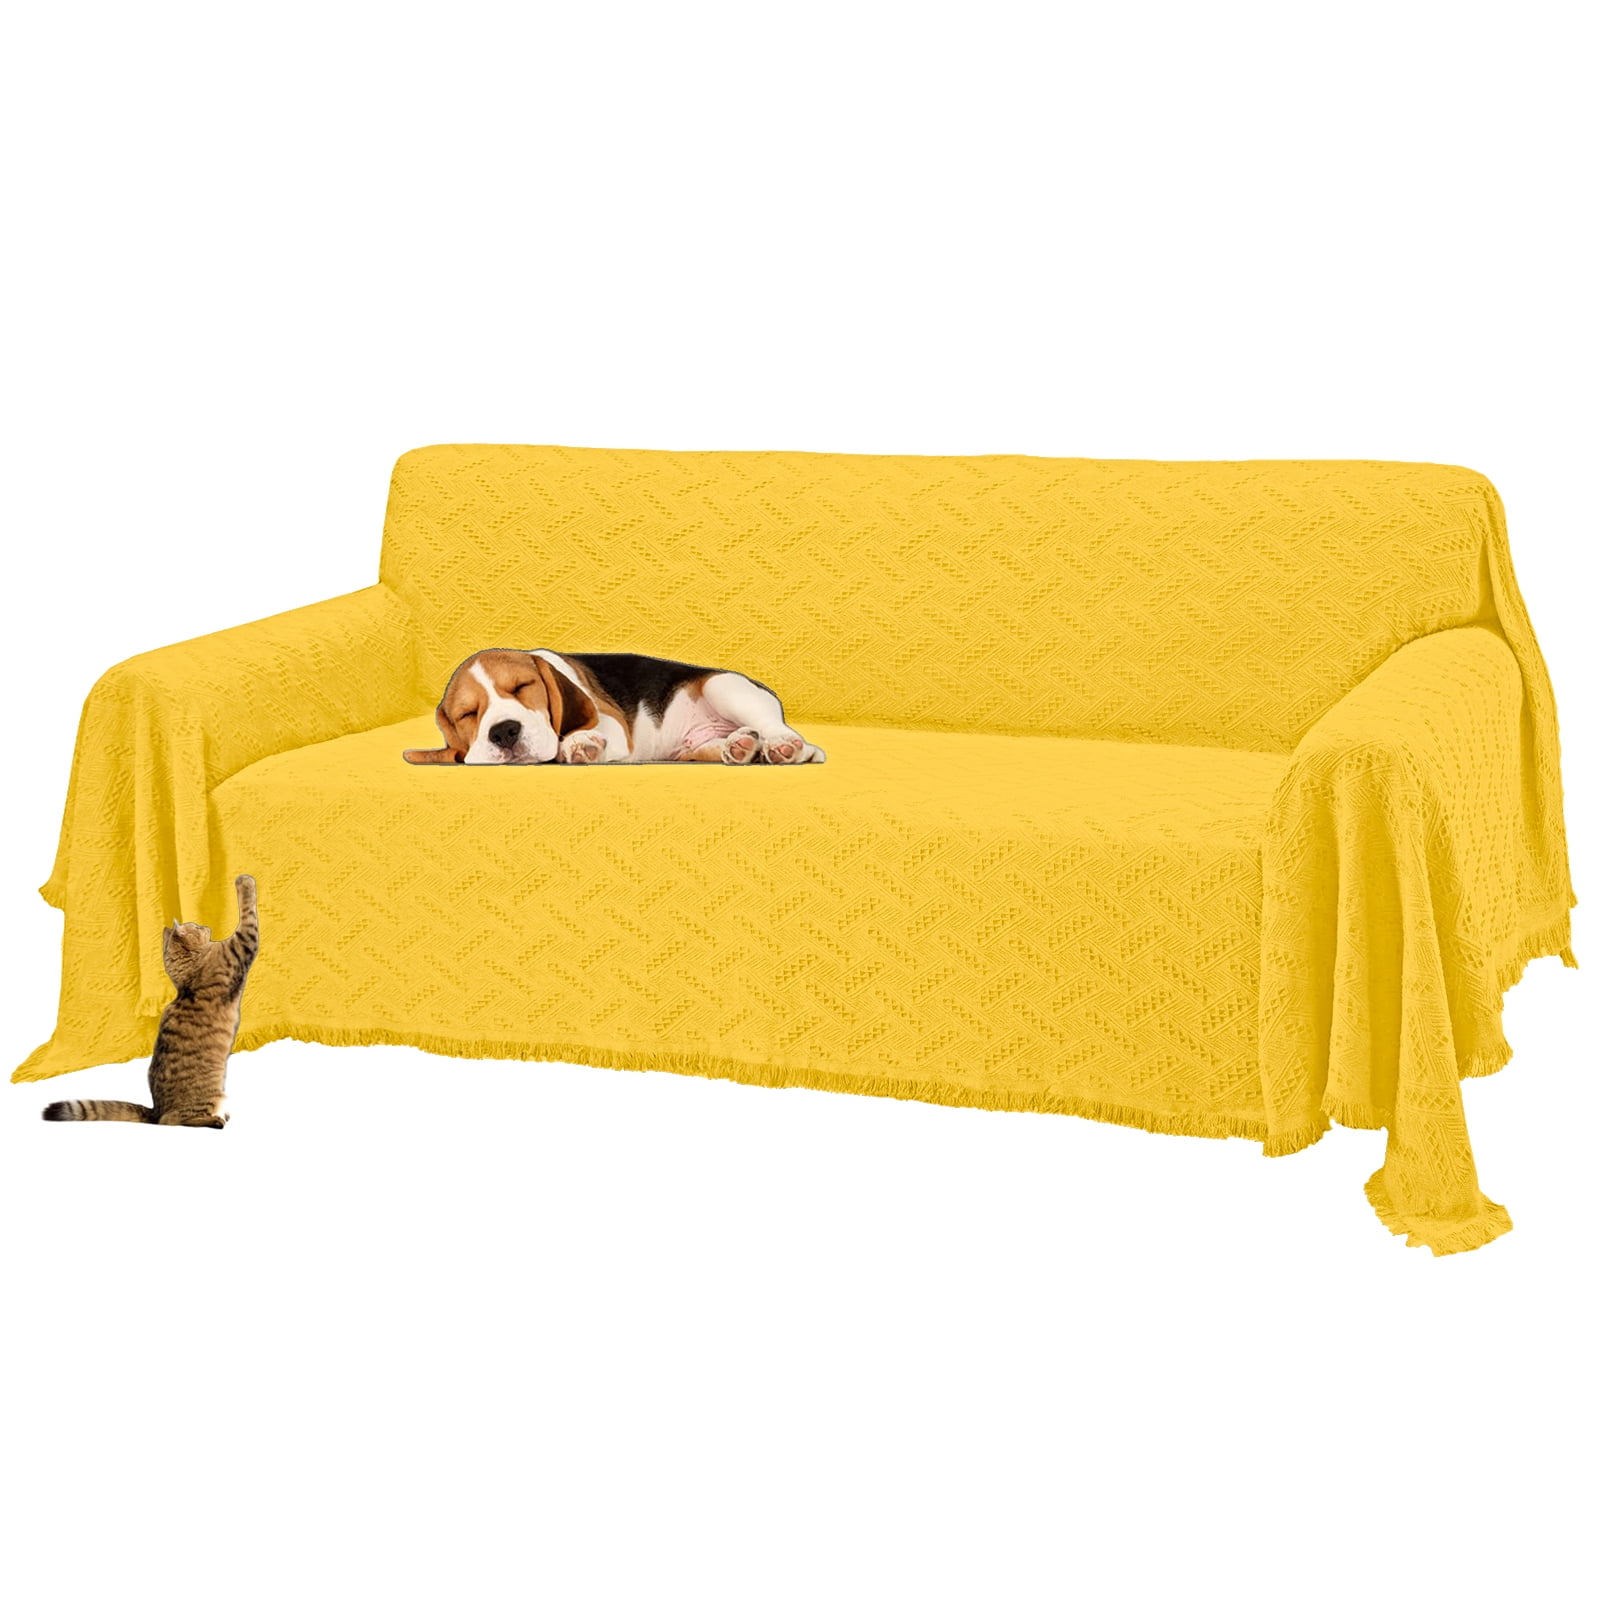 Sanmadrola Sofa Cover, Couch Covers for 3 Cushion Couch Sofa, Sectional ...